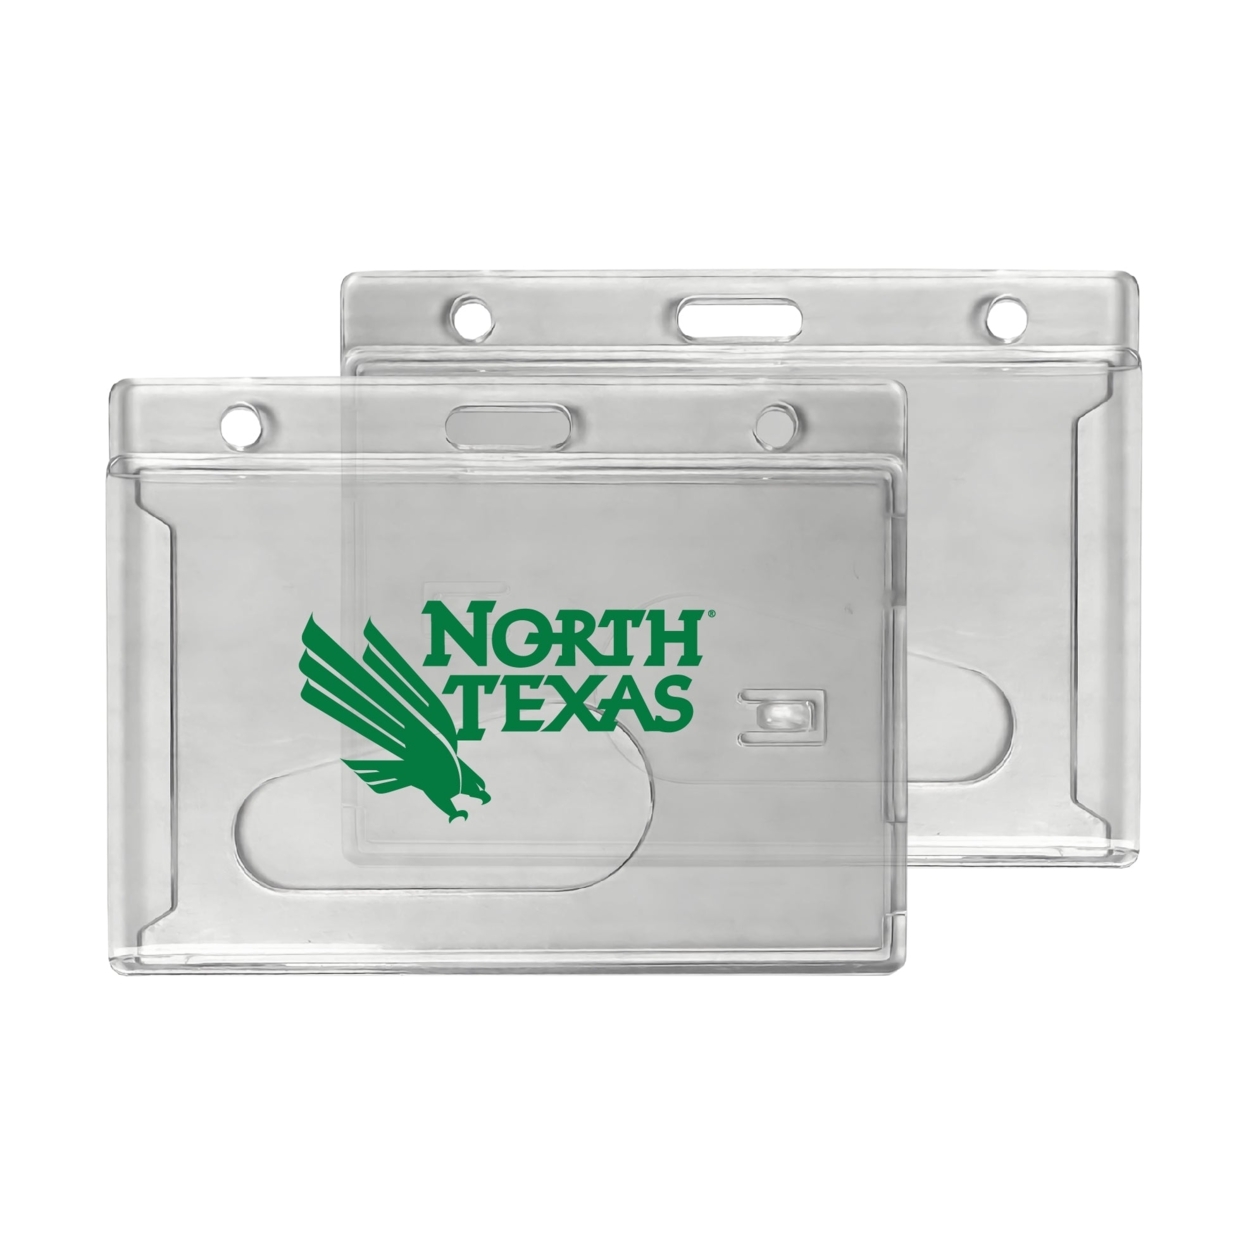 North Texas Clear View ID Holder